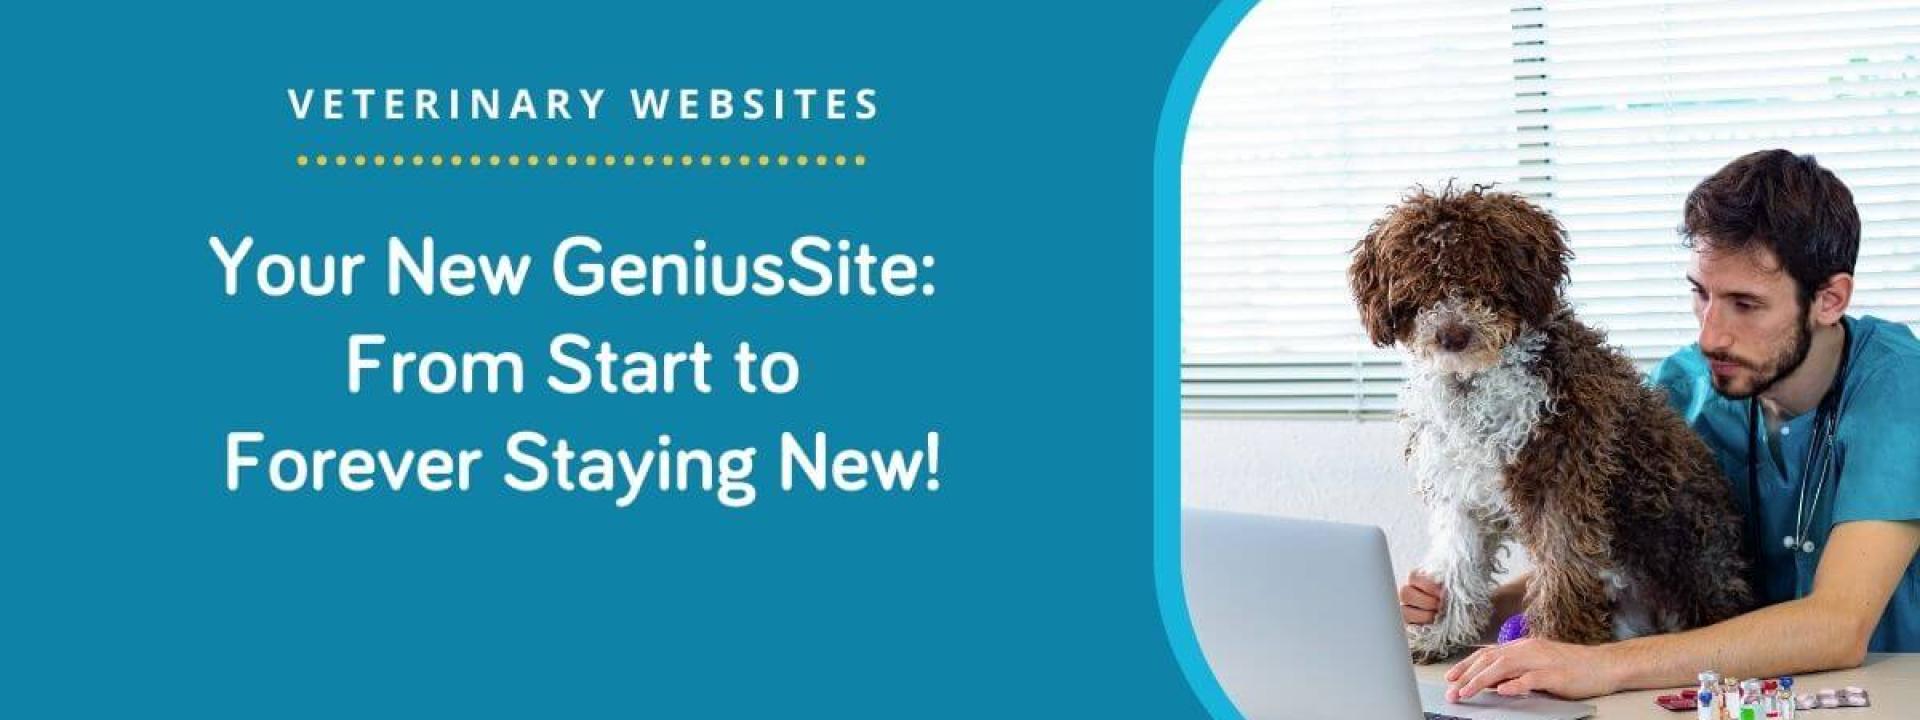 Your New GeniusSite: From Start to Forever Staying New!